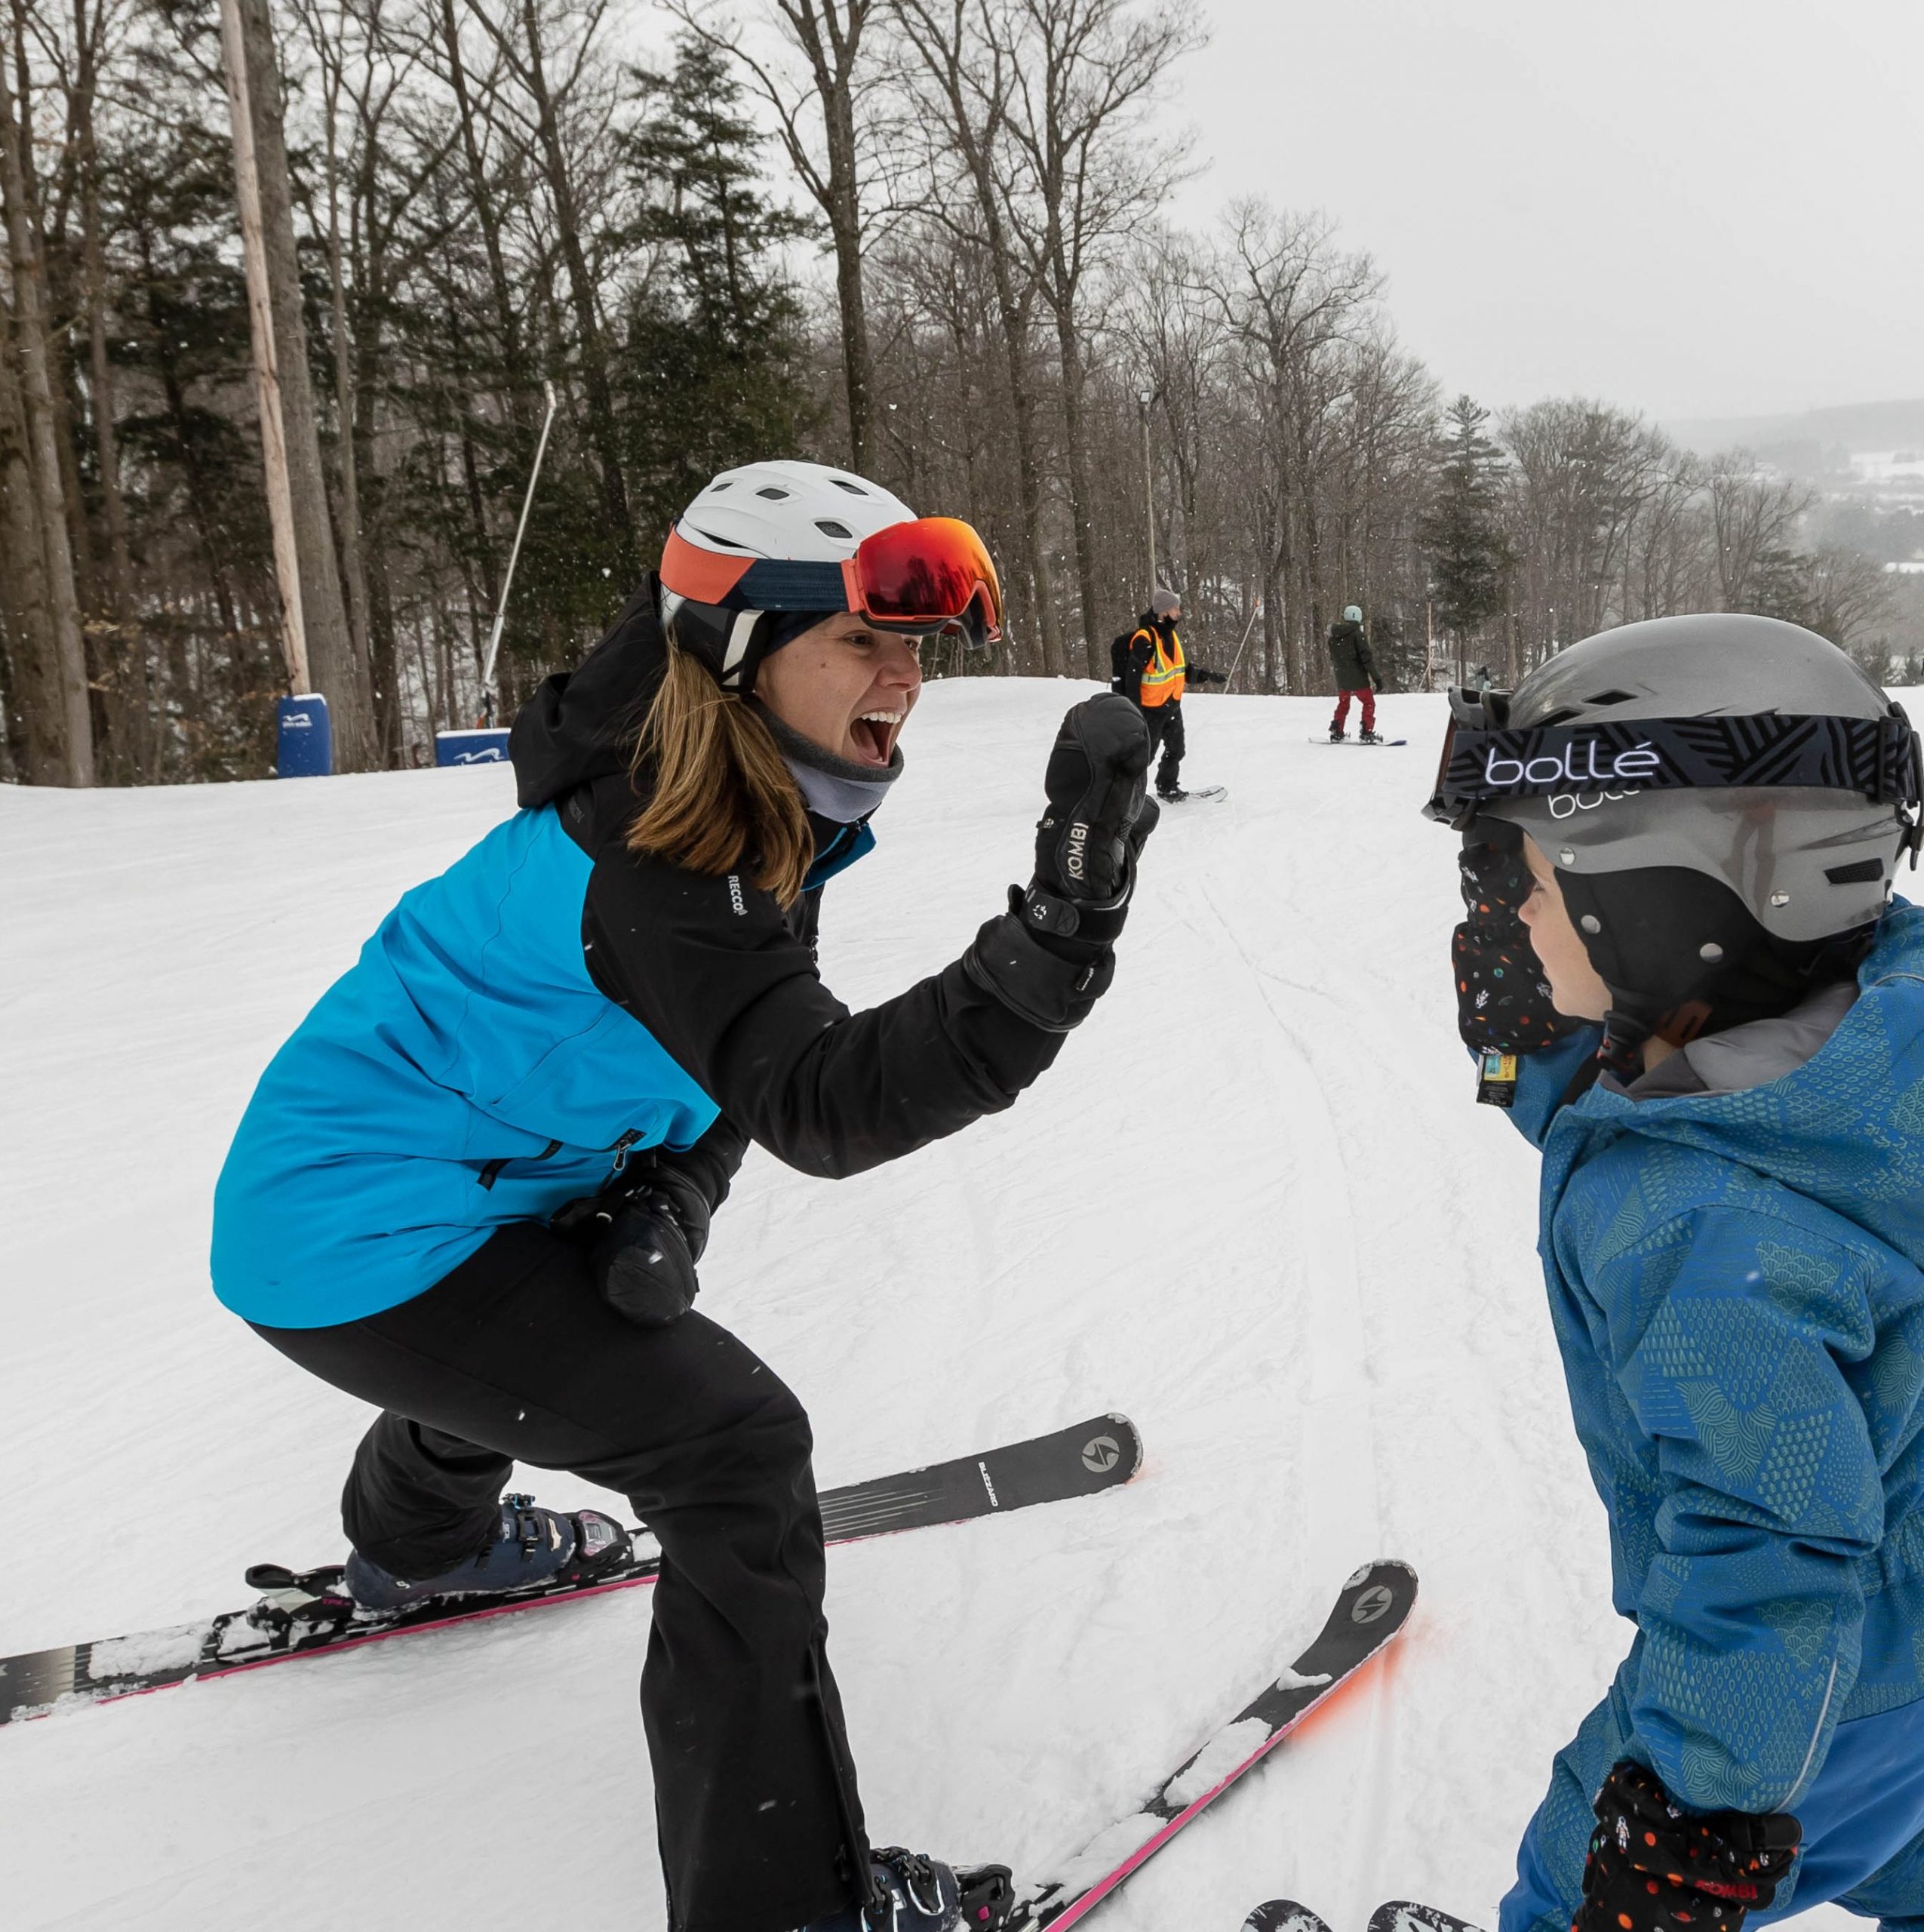 a young girl on skis gives a high-five to another young child